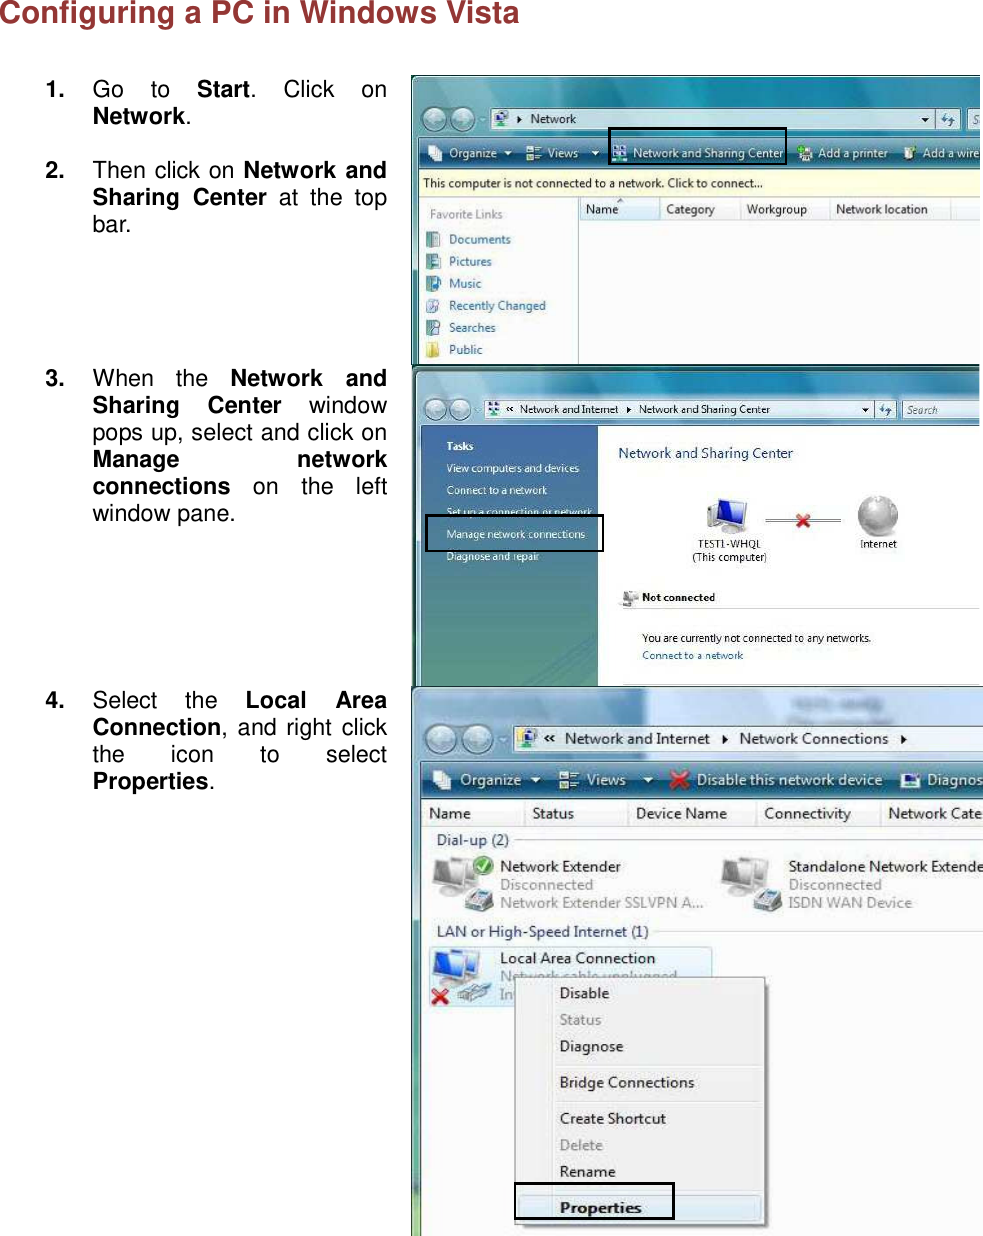  Configuring a PC in Windows Vista      1. Go  to Start.  Click  on Network.  2.  Then click on Network and Sharing  Center  at  the  top bar.  3. When  the Network  and Sharing  Center  window pops up, select and click on Manage  network connections  on  the  left window pane.  4. Select  the Local  Area Connection, and right click the  icon  to  select Properties.  